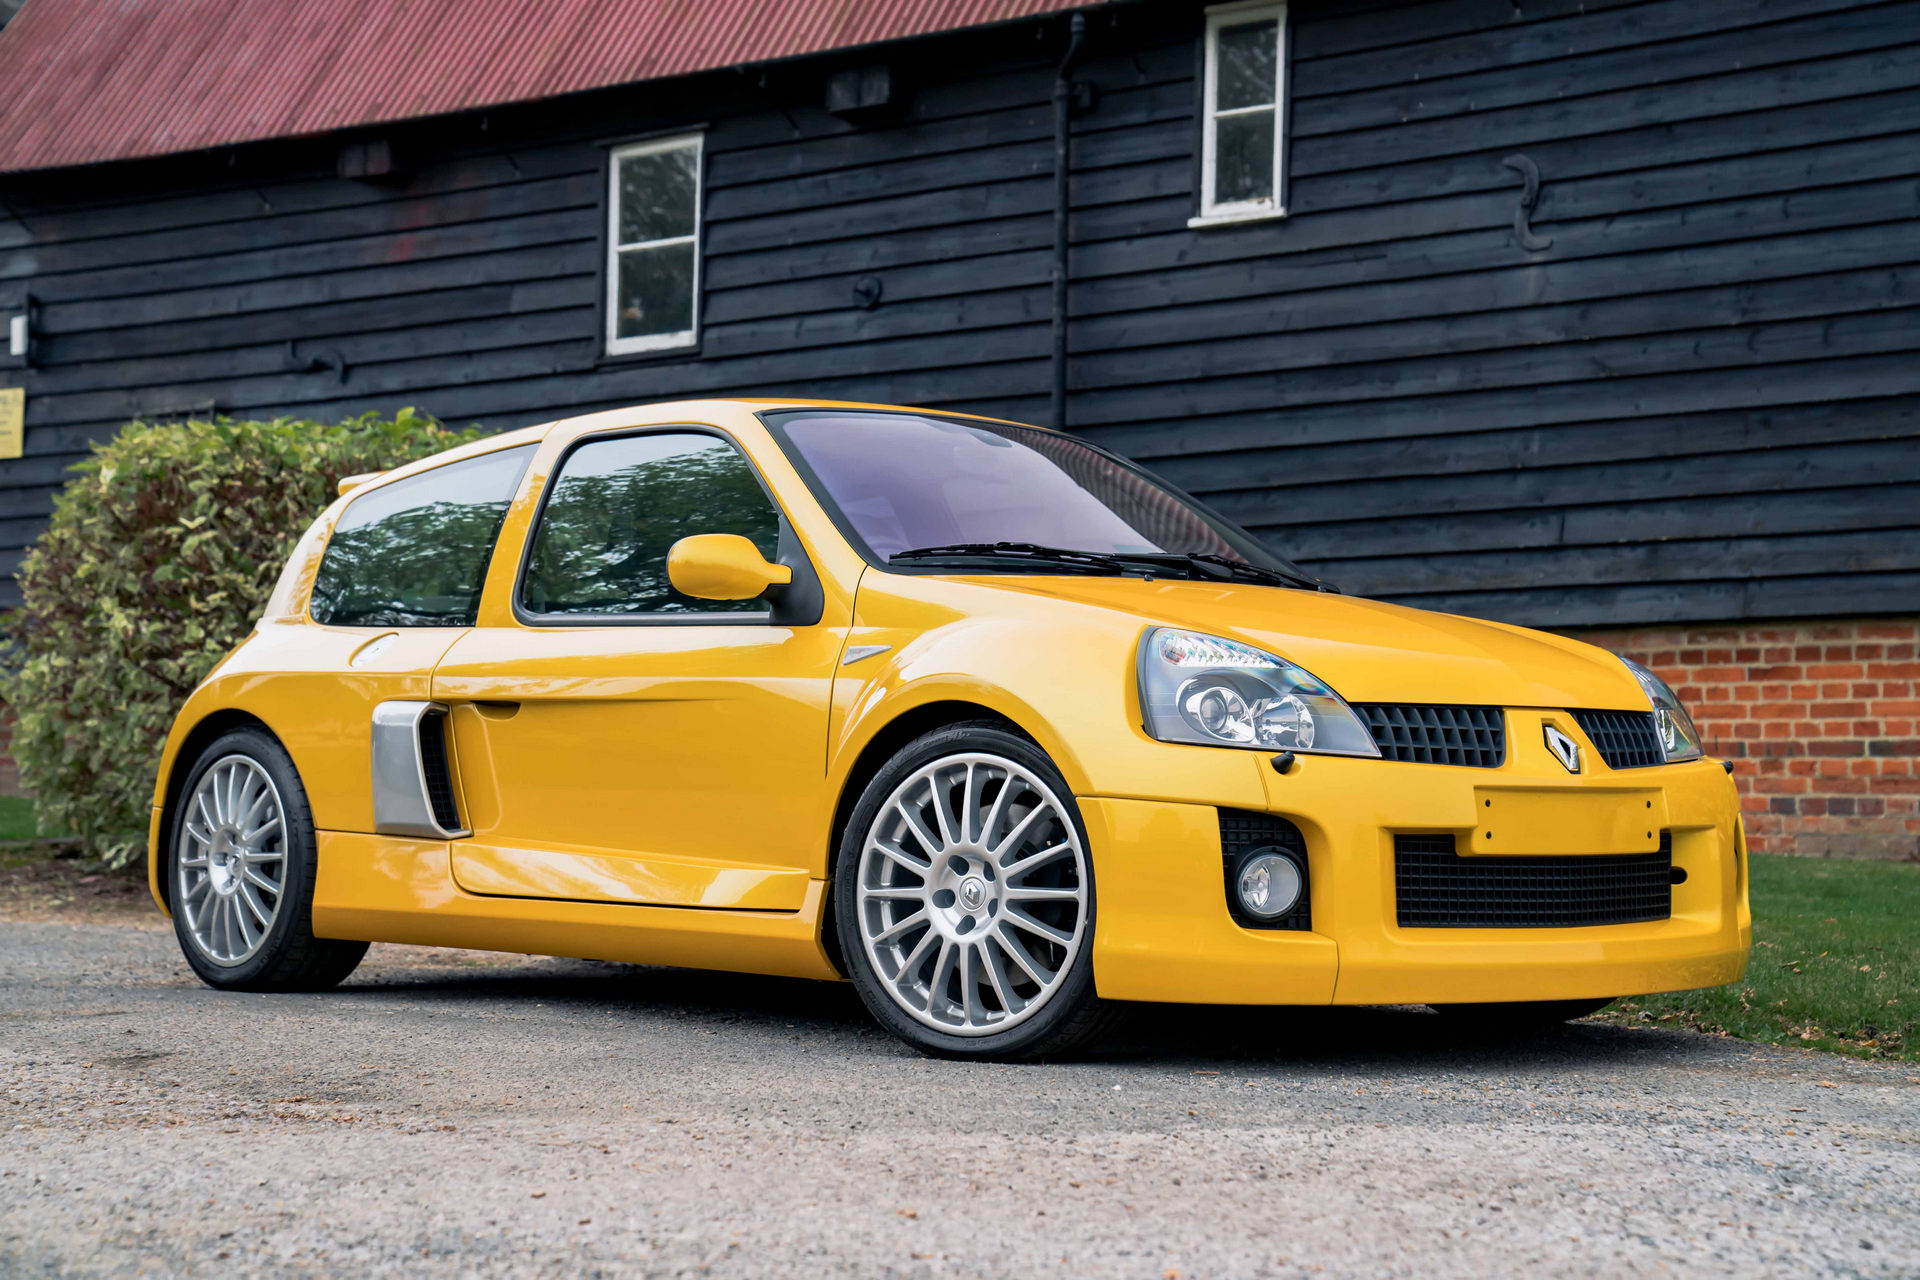 A 980-Mile Renault V6 Just Sold For A Record Price | Carscoops